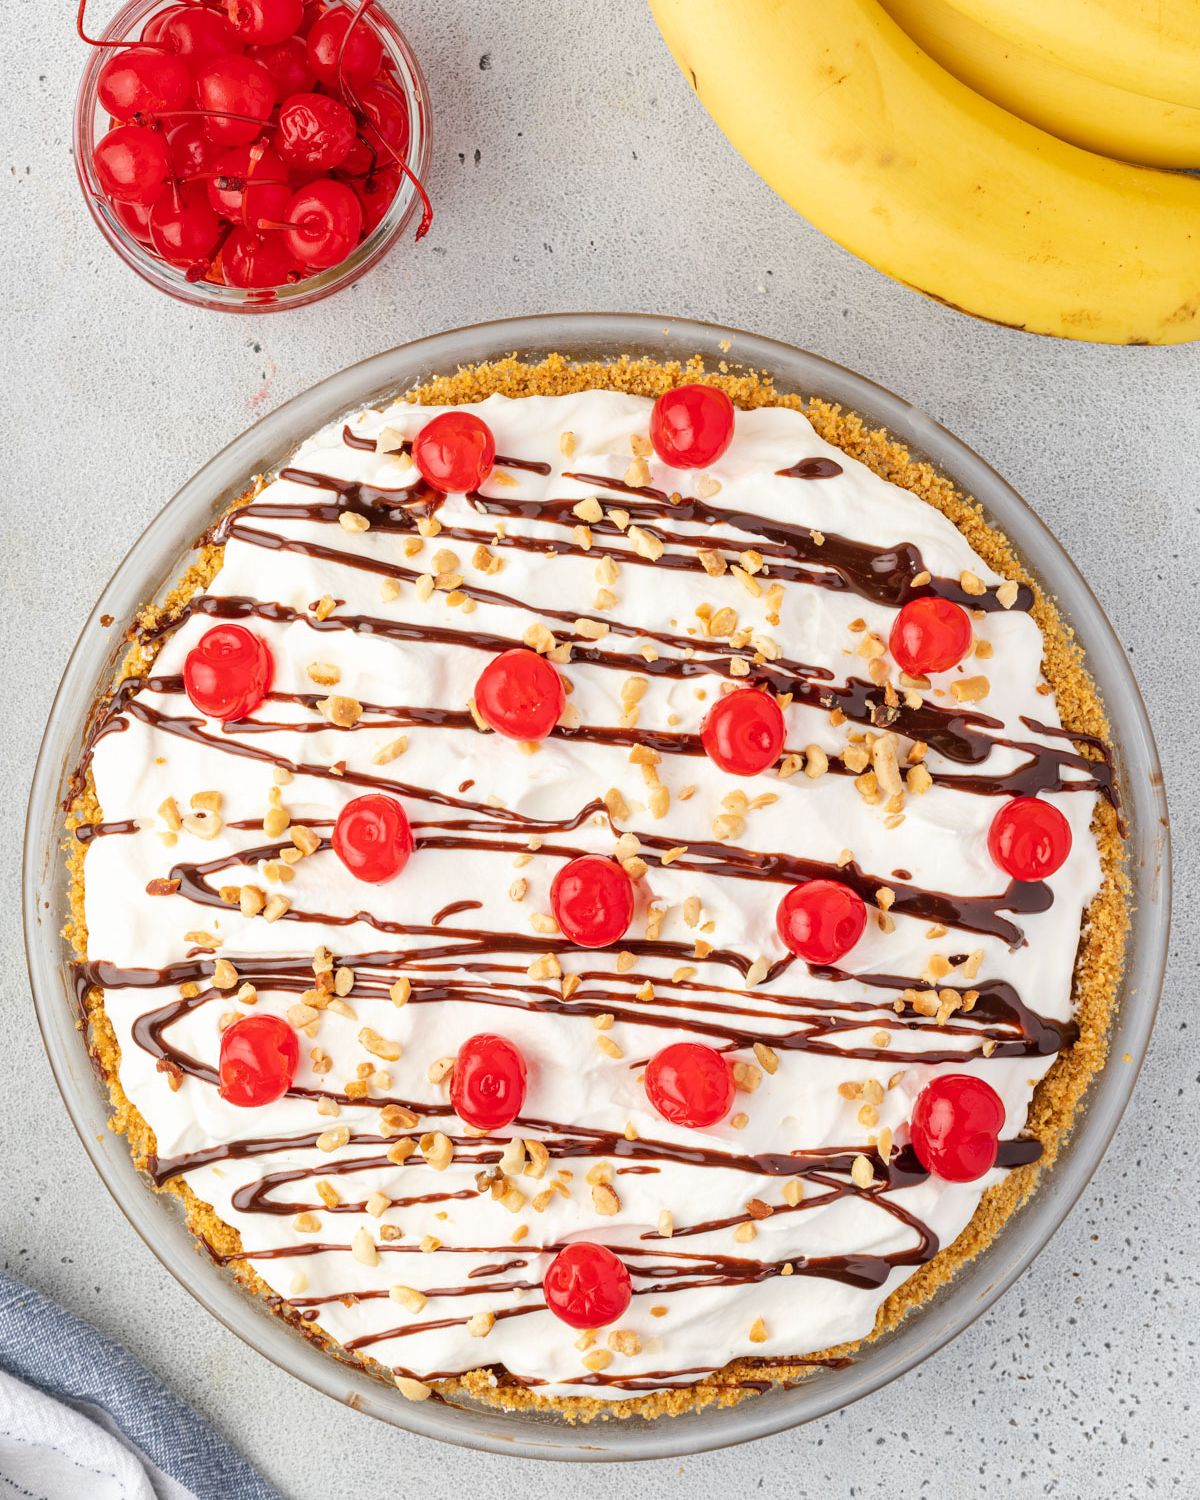 Overhead of the finished banana split pie with a jar of cherries and some bananas at top of image.